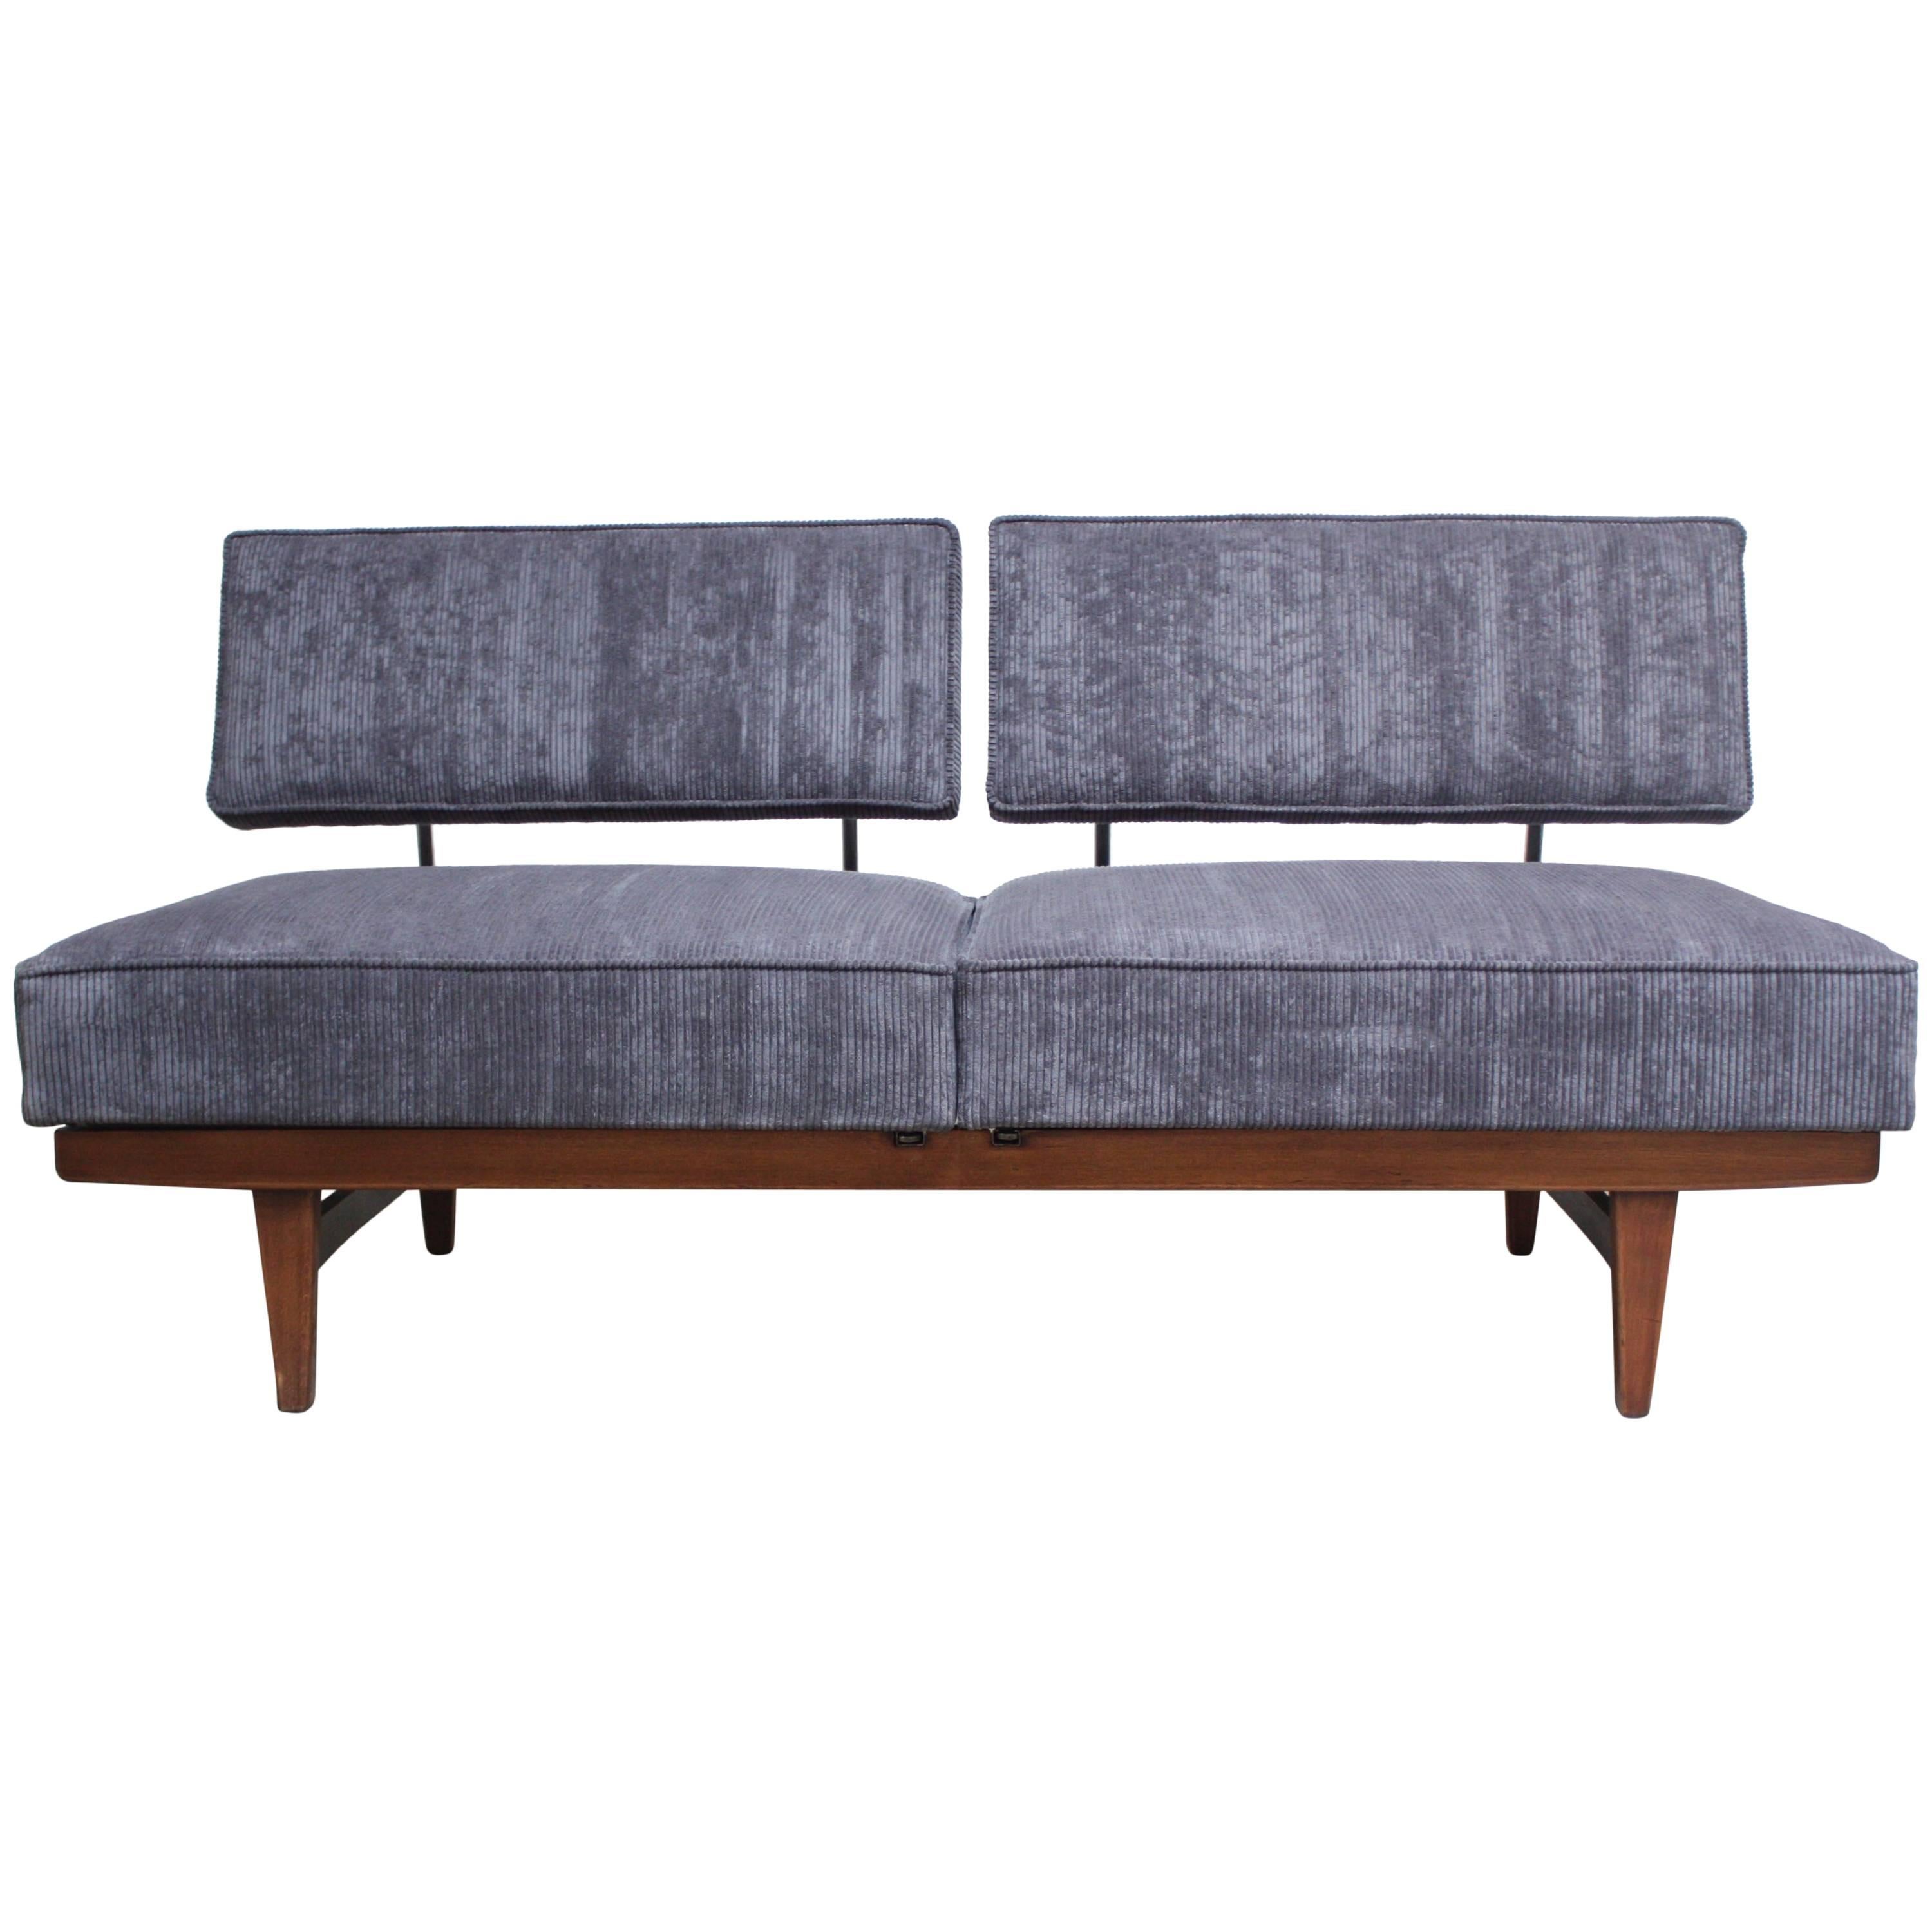 Danish Modern Convertible Daybed/Sofa on Chrome and Walnut Base